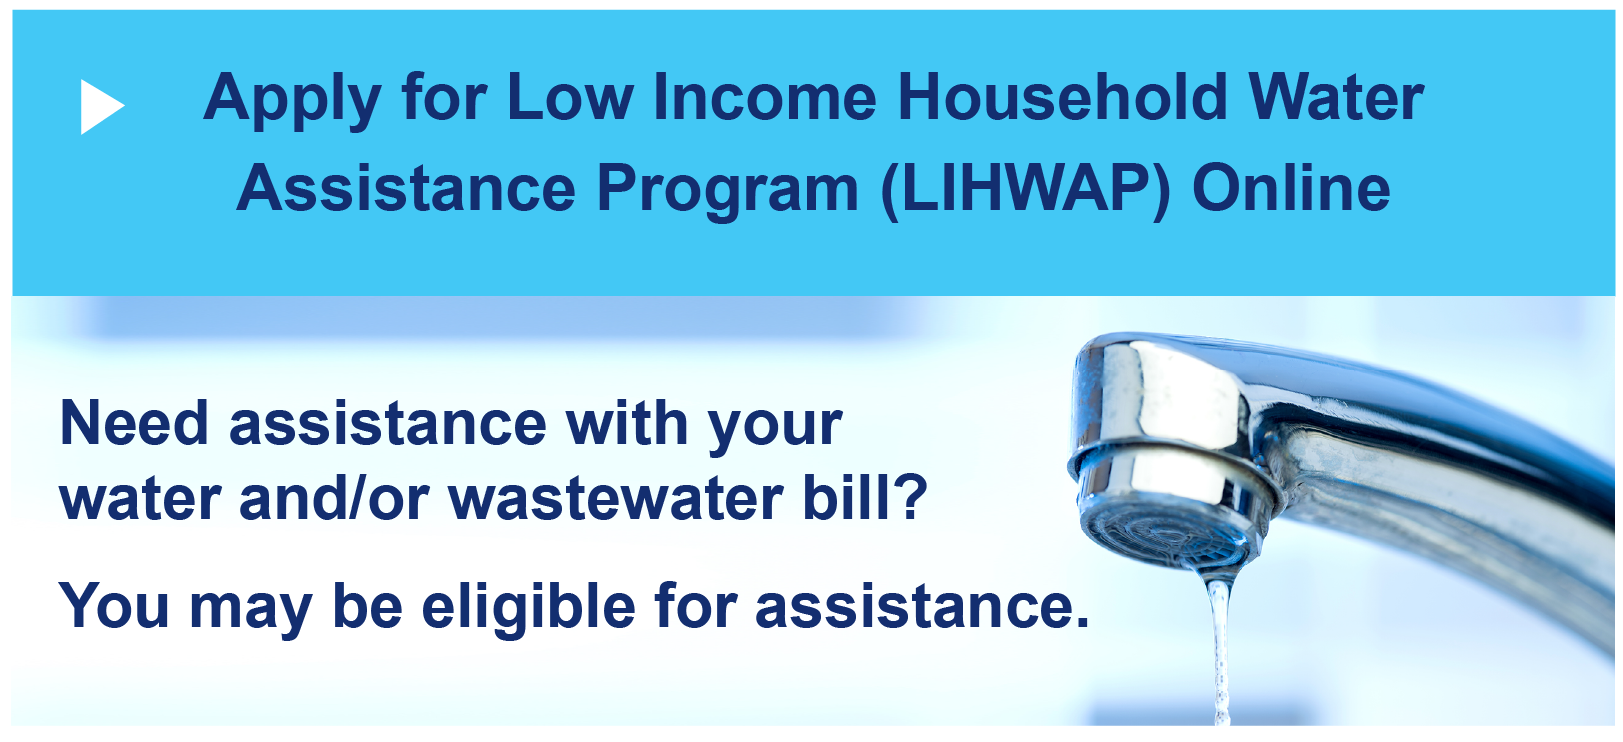 Apply for Low Income Household Water Assistance Program Online